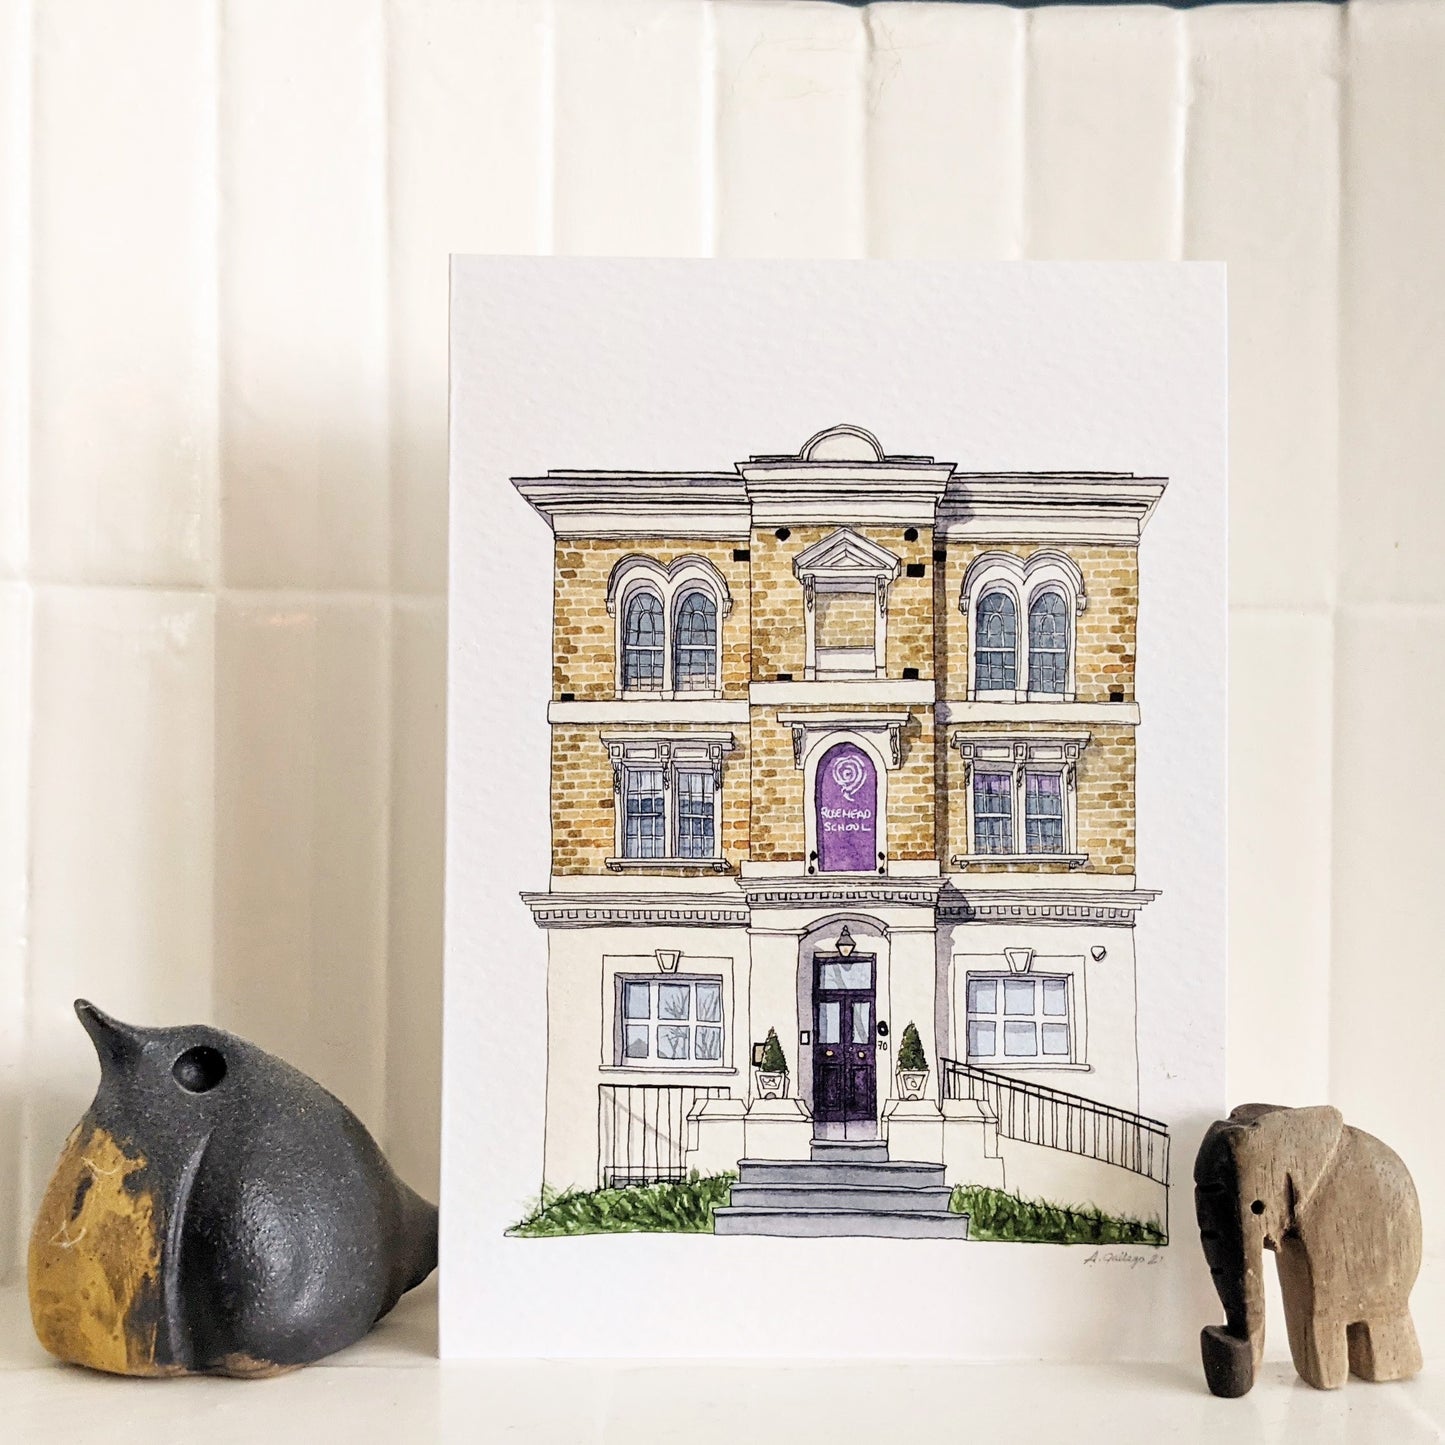 Tulse Hill - Rosemead Preparatory School - Greeting card with envelope - West Norwood